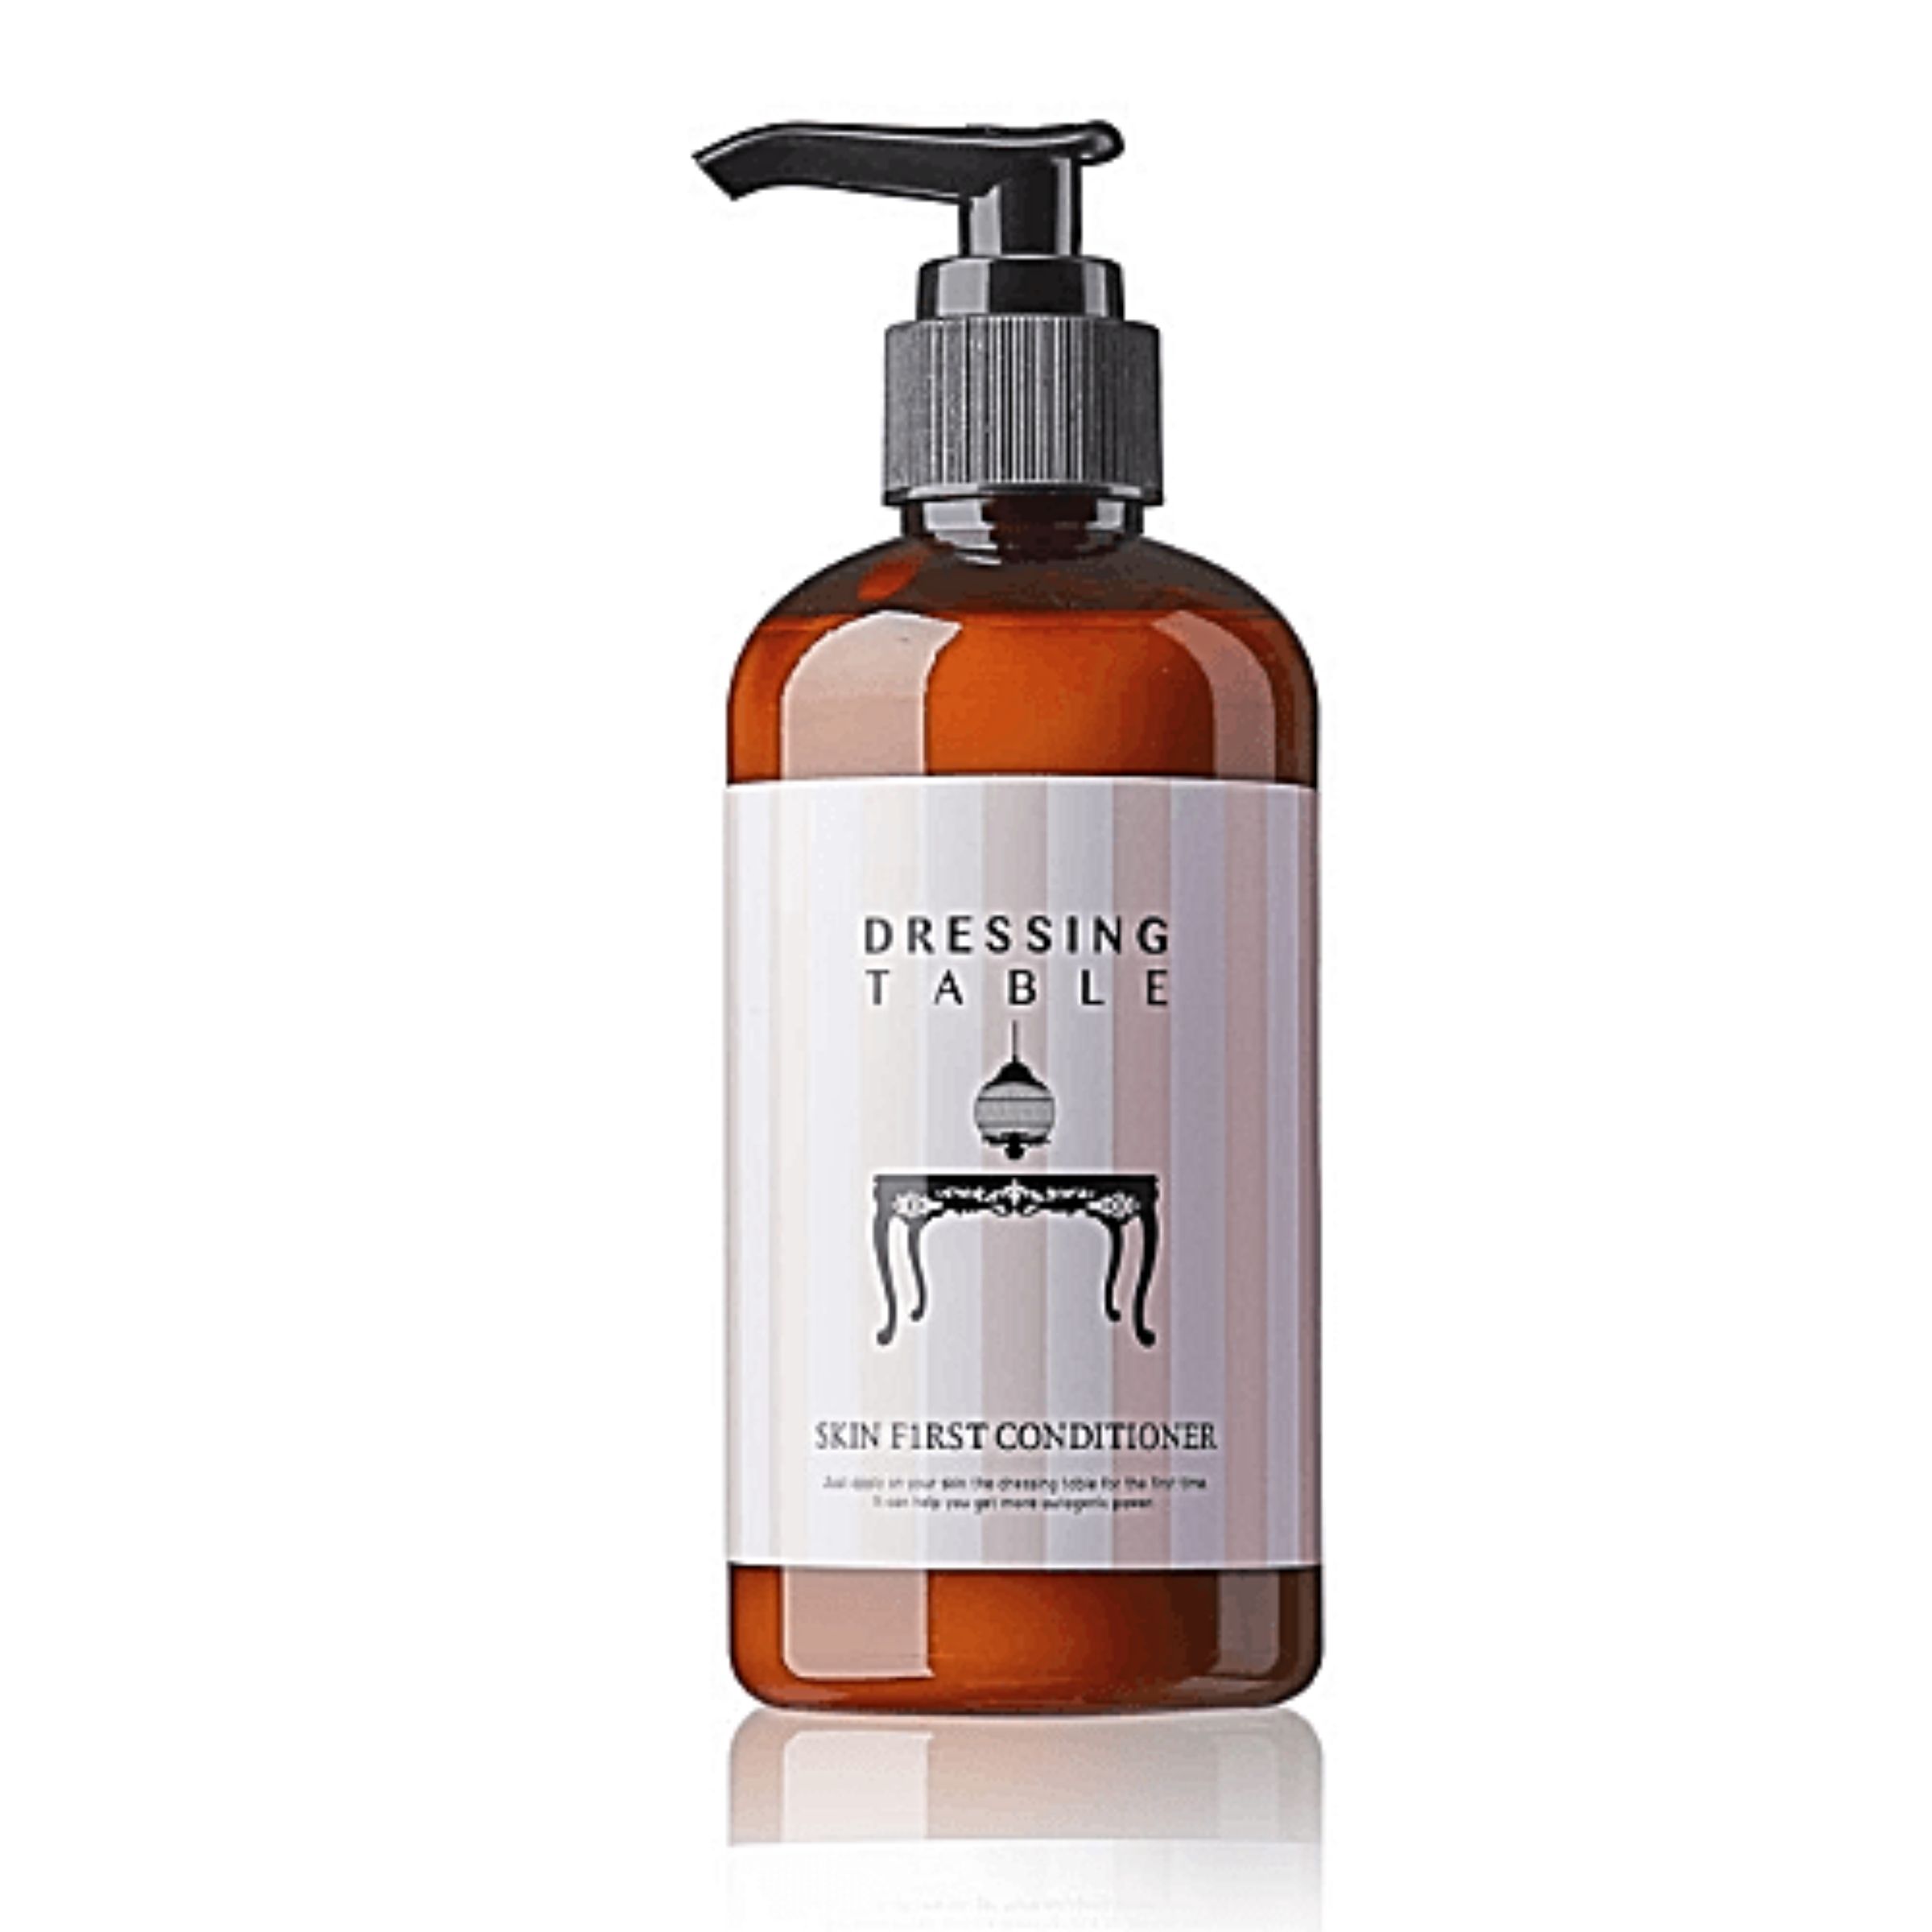 Dressing Table - Skin-First Conditioner